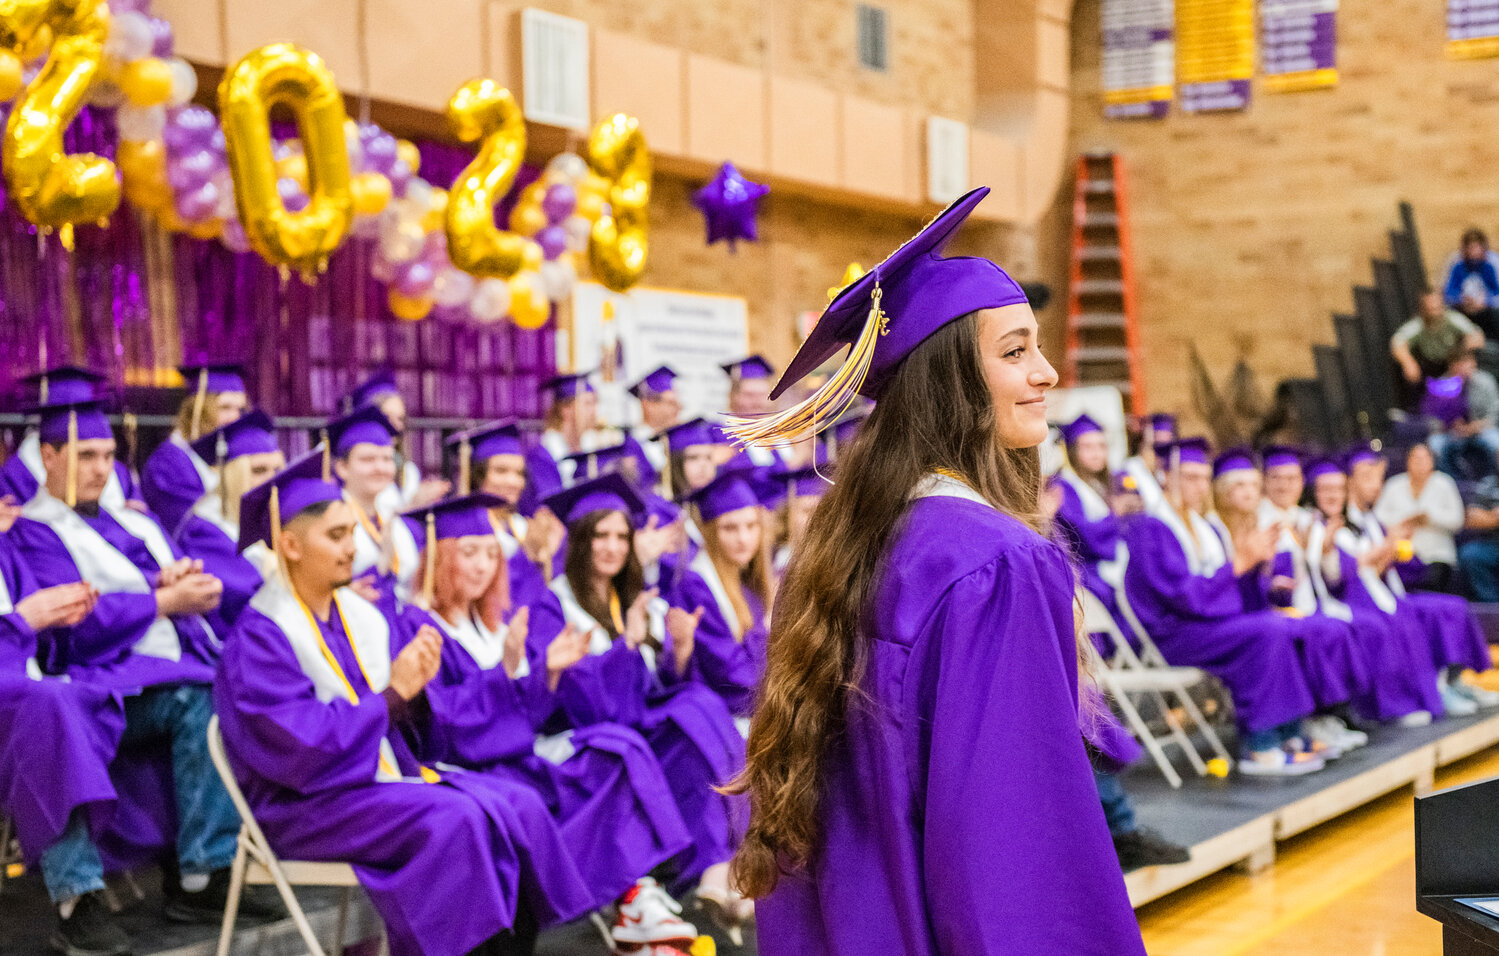 In the Loggers’ gym on Friday night, Onalaska High School’s 100th graduating class of seniors applauds Valedictorian Brooklyn Raya Marie Sandridge, who graduated with the class’ highest honors and will attend Harvard University in the fall as a student and a member of the track team.